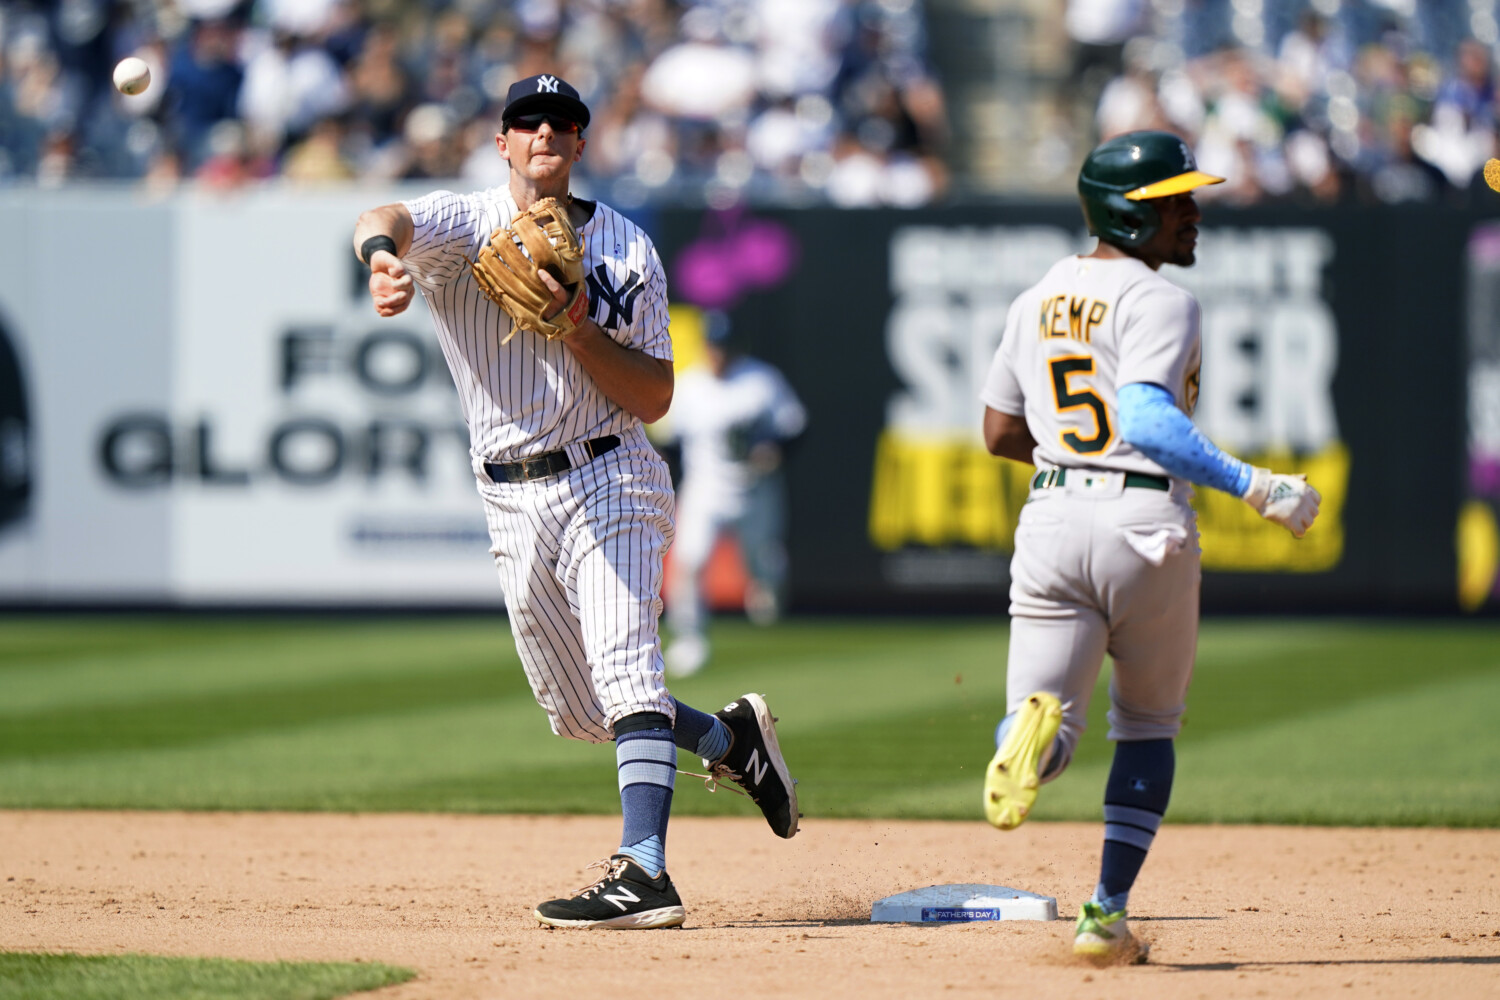 Taylor with the go-ahead homer in Brewers 9-2 win over the Yankees